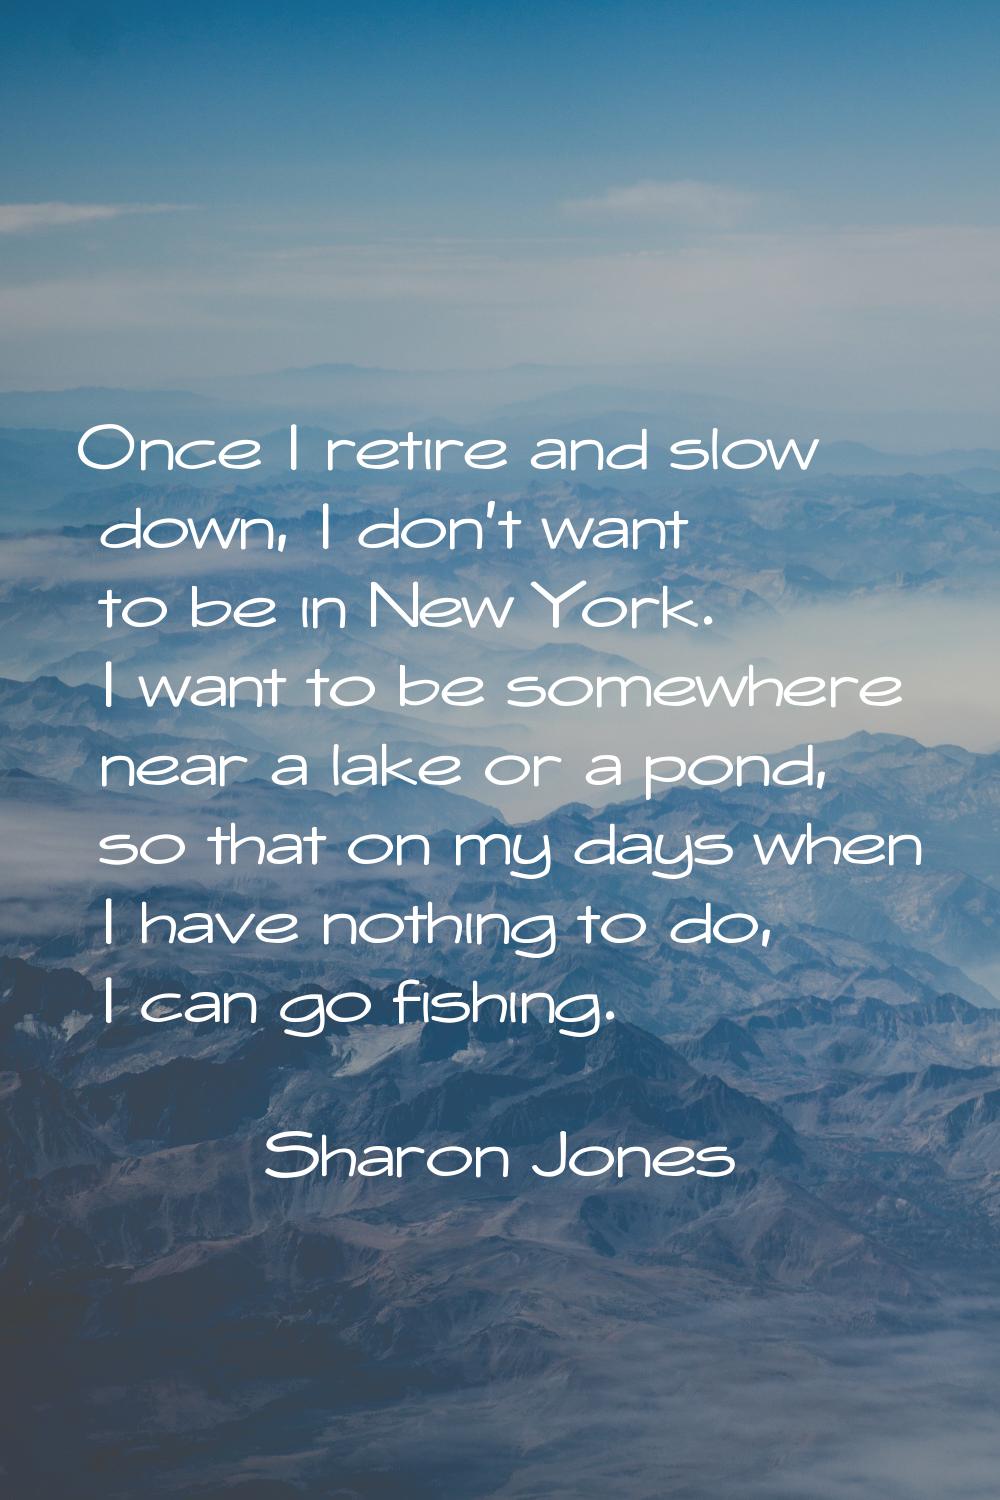 Once I retire and slow down, I don't want to be in New York. I want to be somewhere near a lake or 